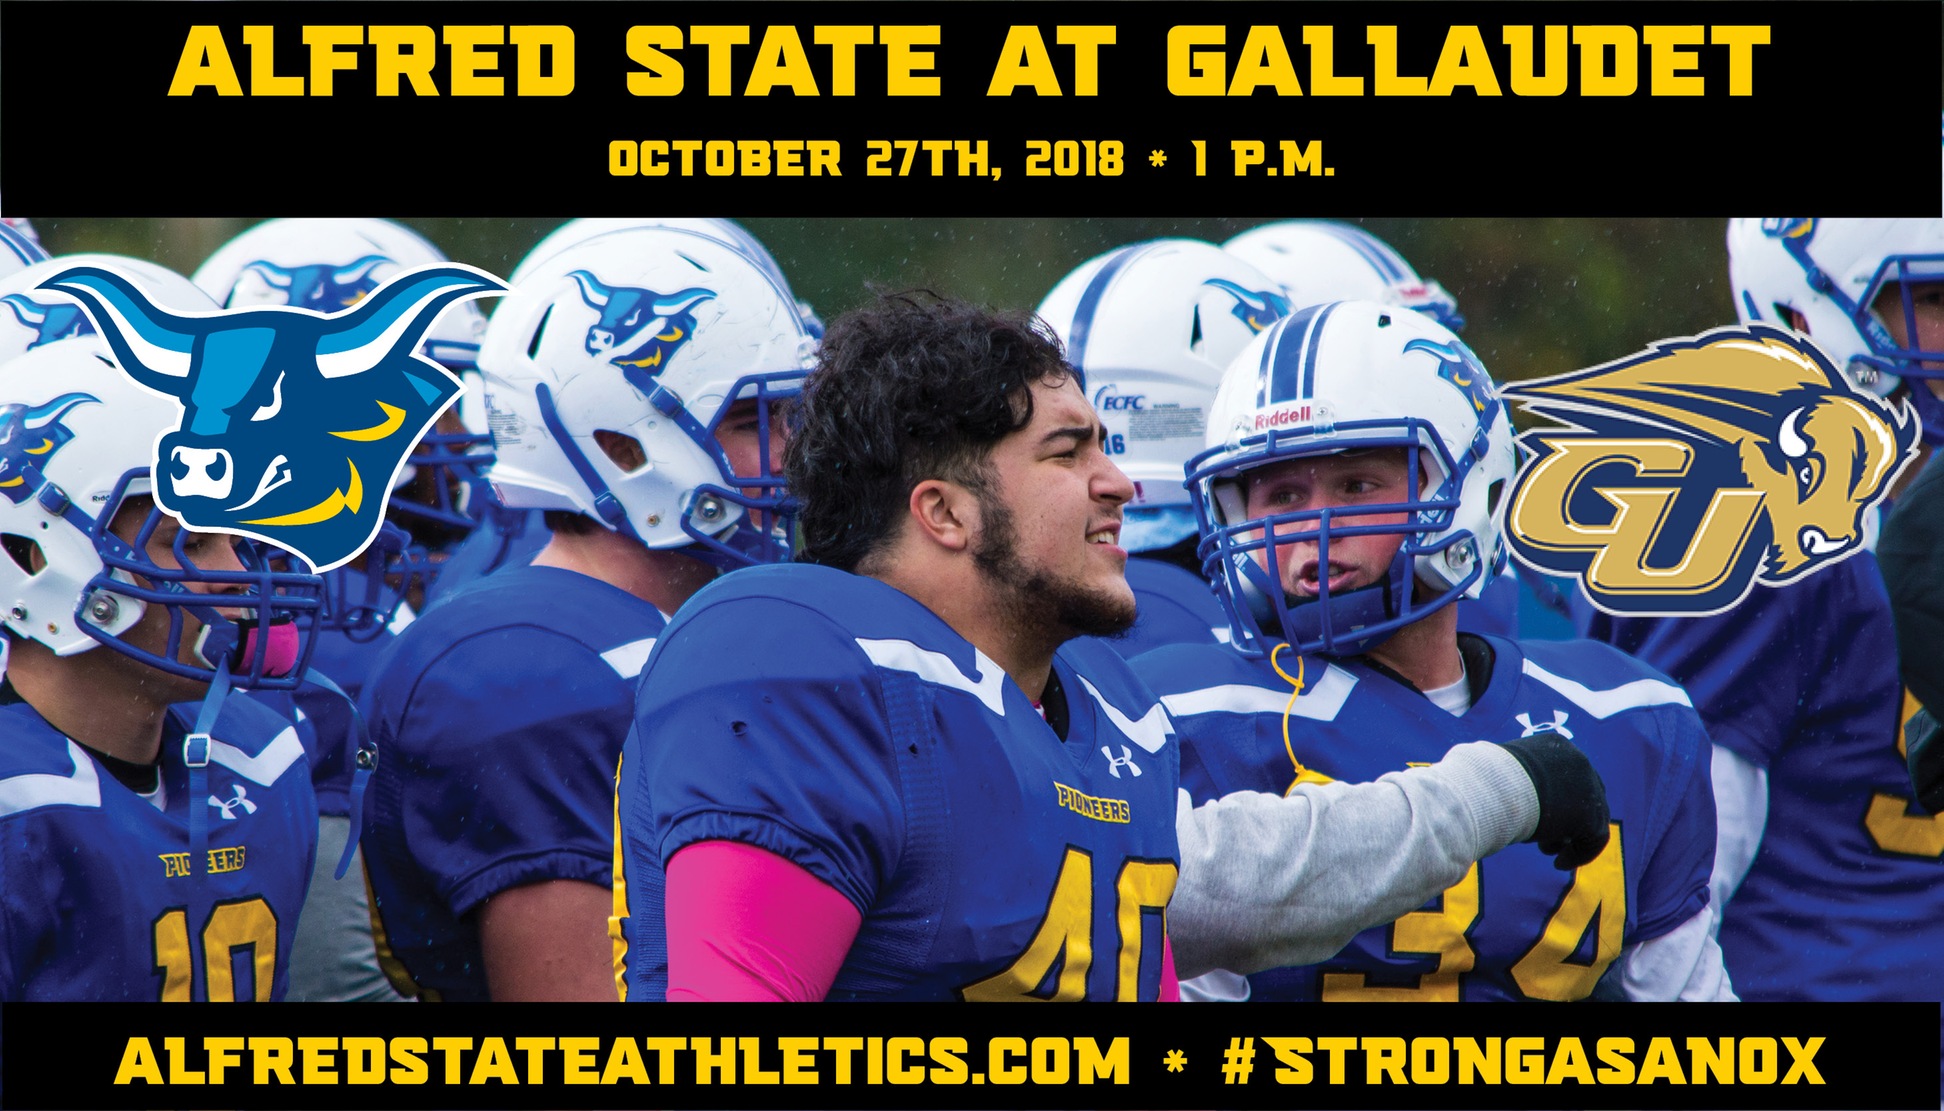 Alfred State travels to DC to battle Gallaudet on Saturday